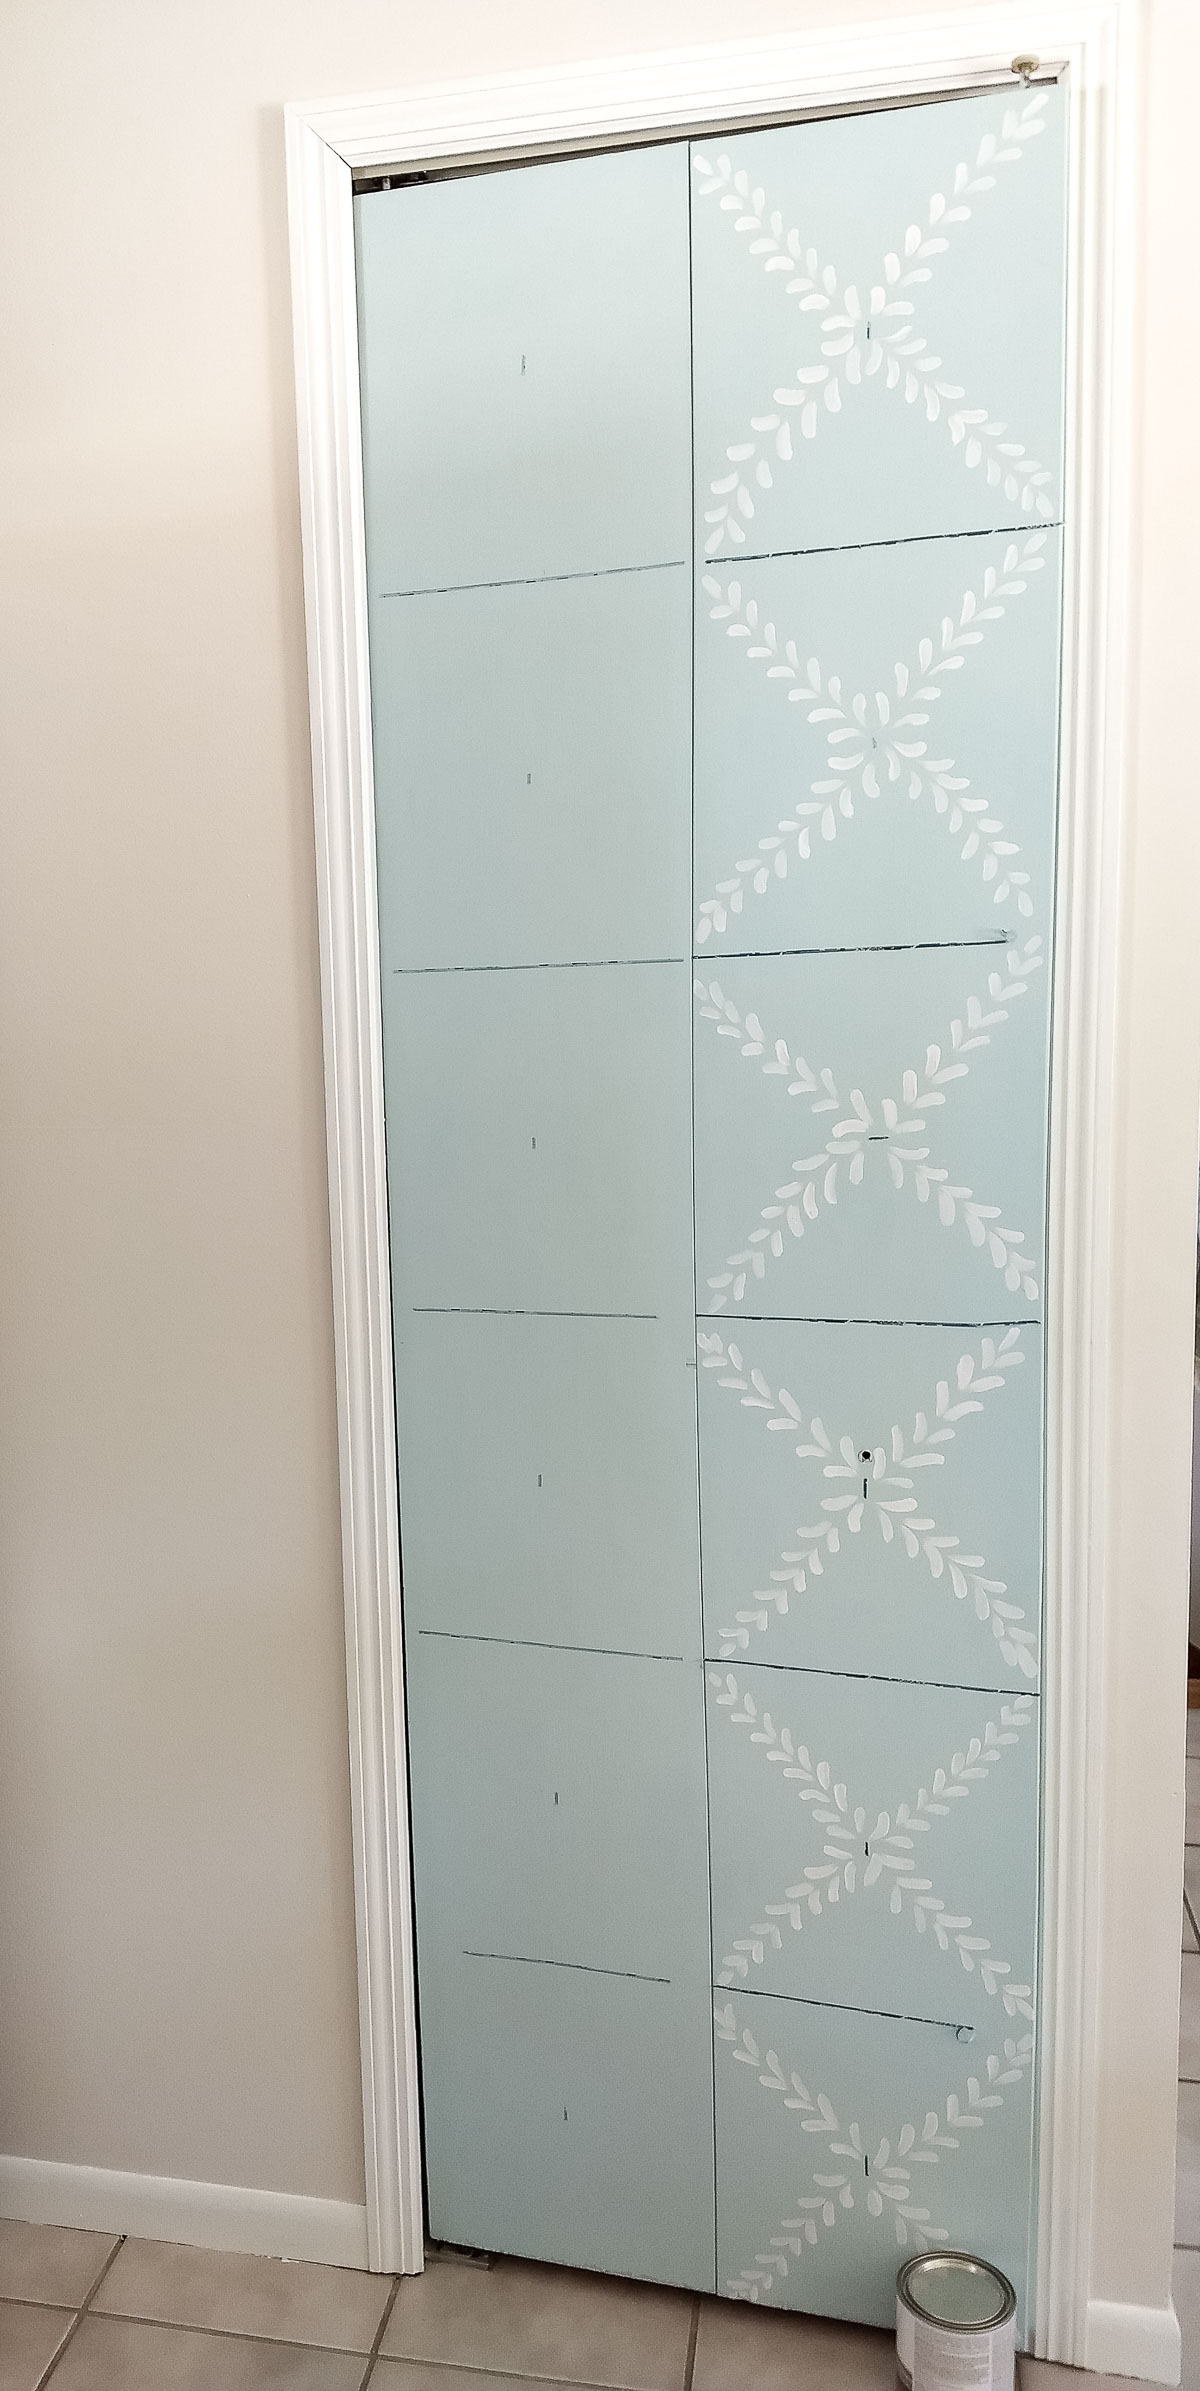 Using washi tape to mark out a design on a pantry door.